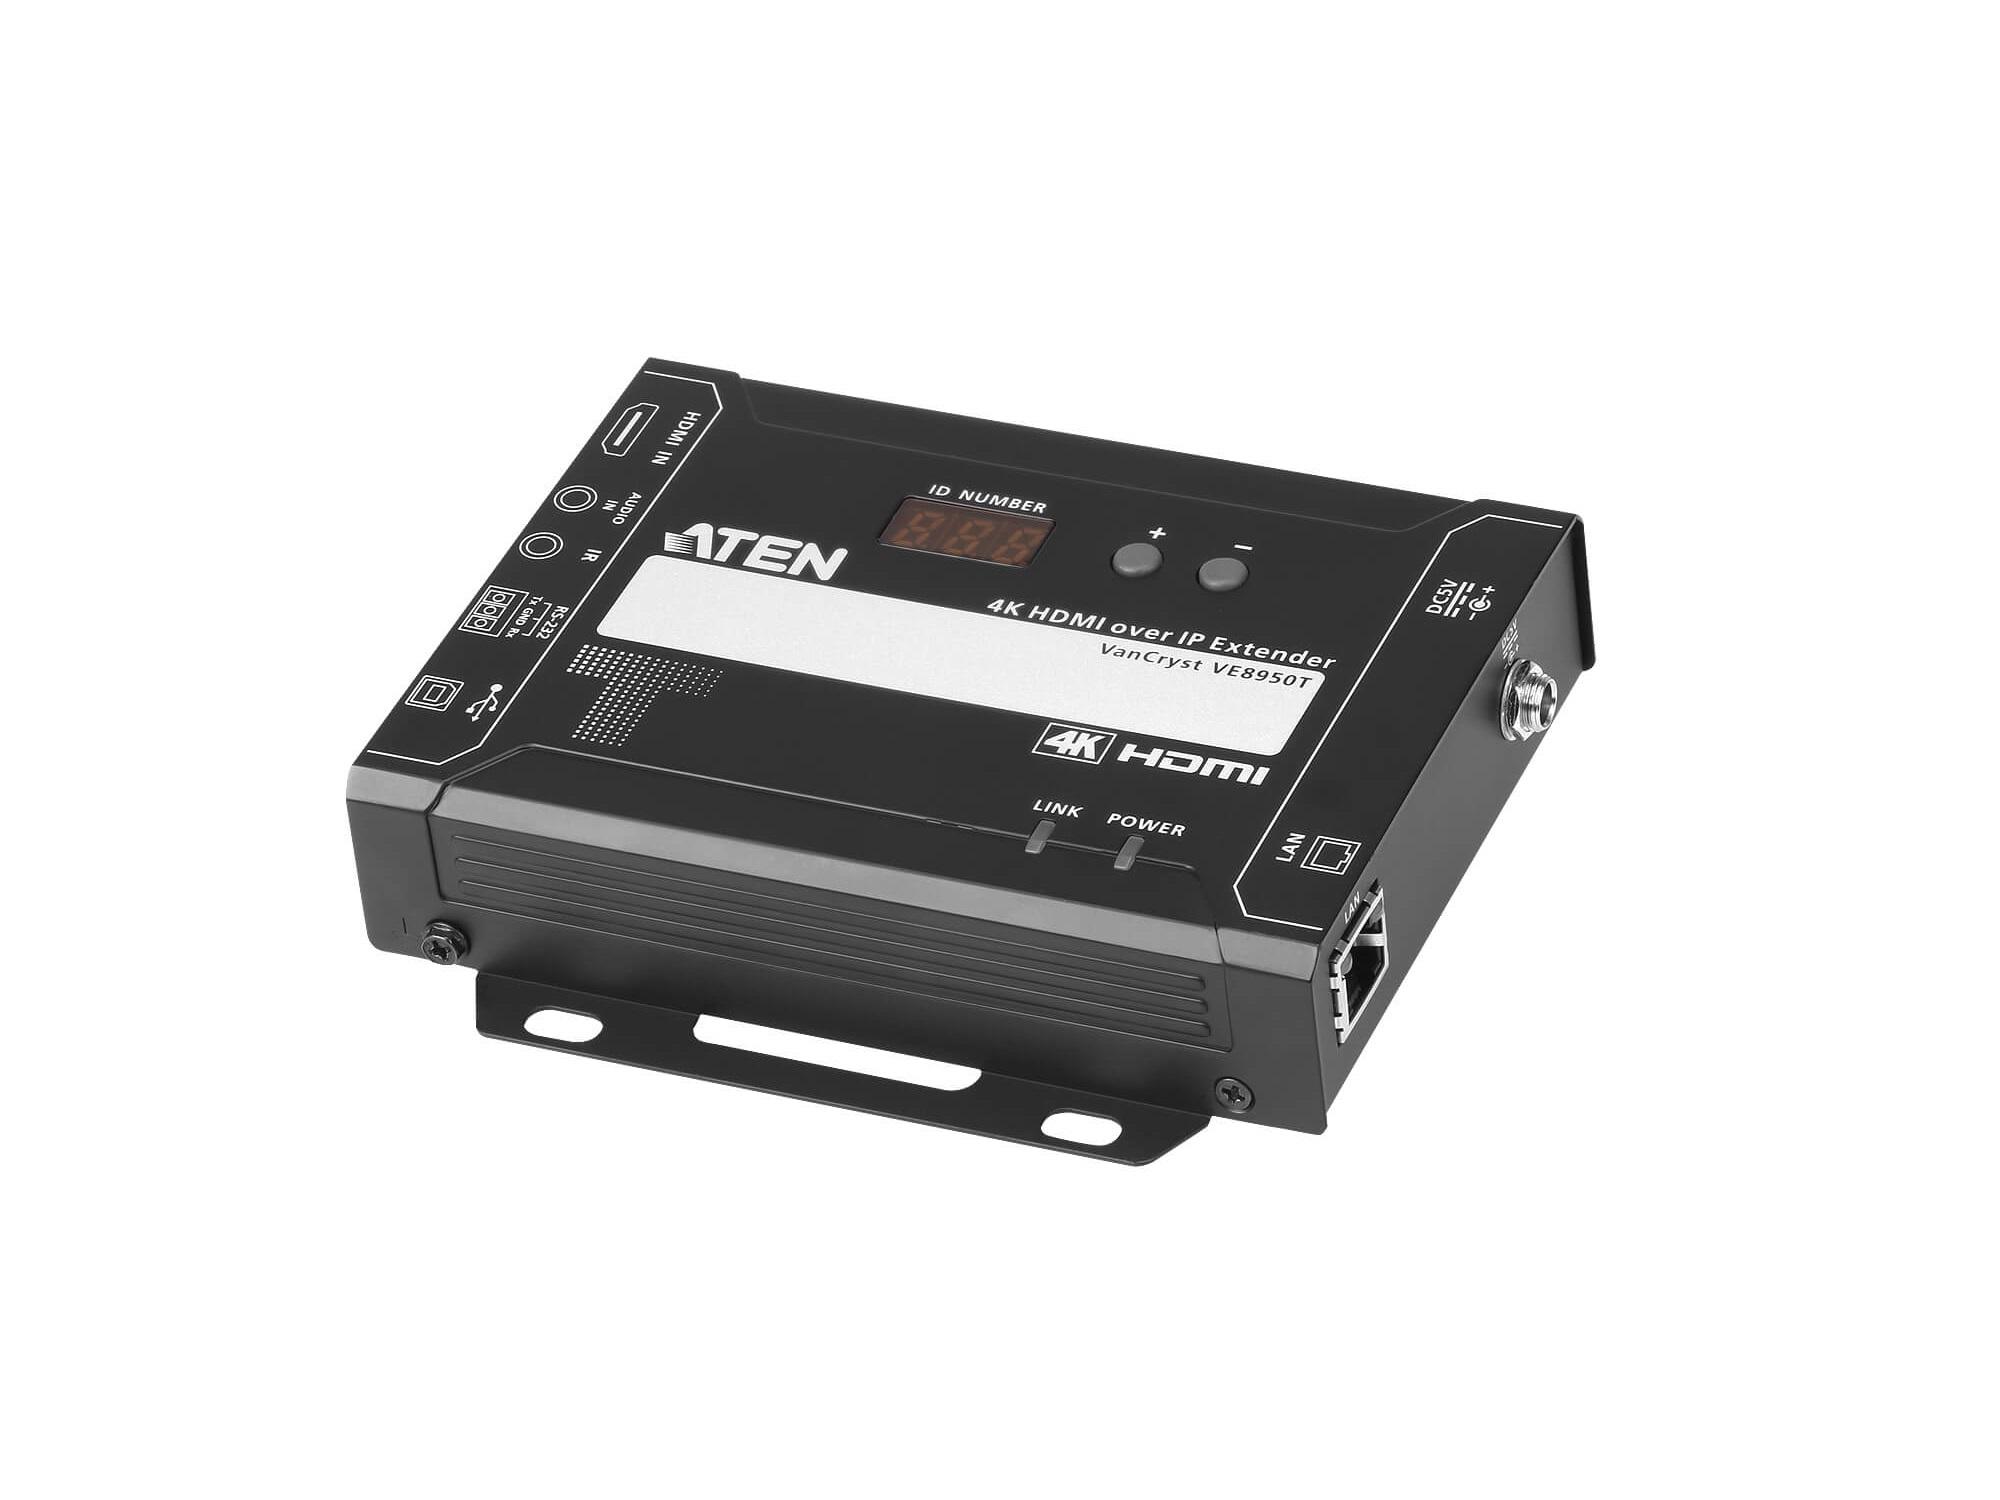 VE8950T 4K HDMI over IP Transmitter by Aten